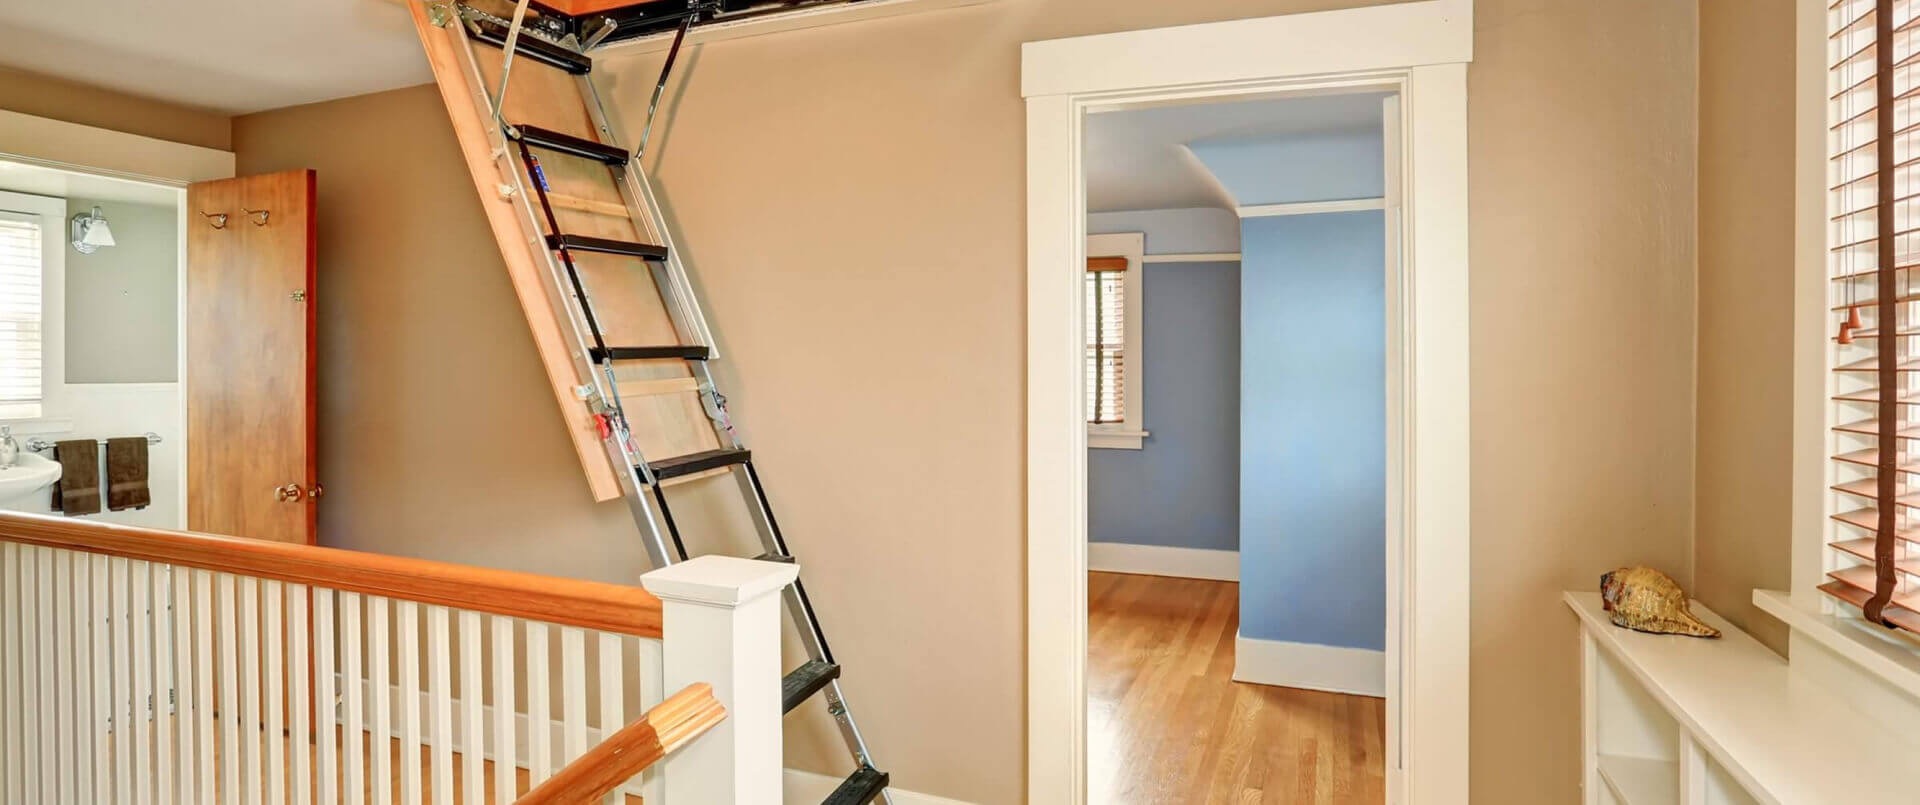 How To Measure For Attic Ladder